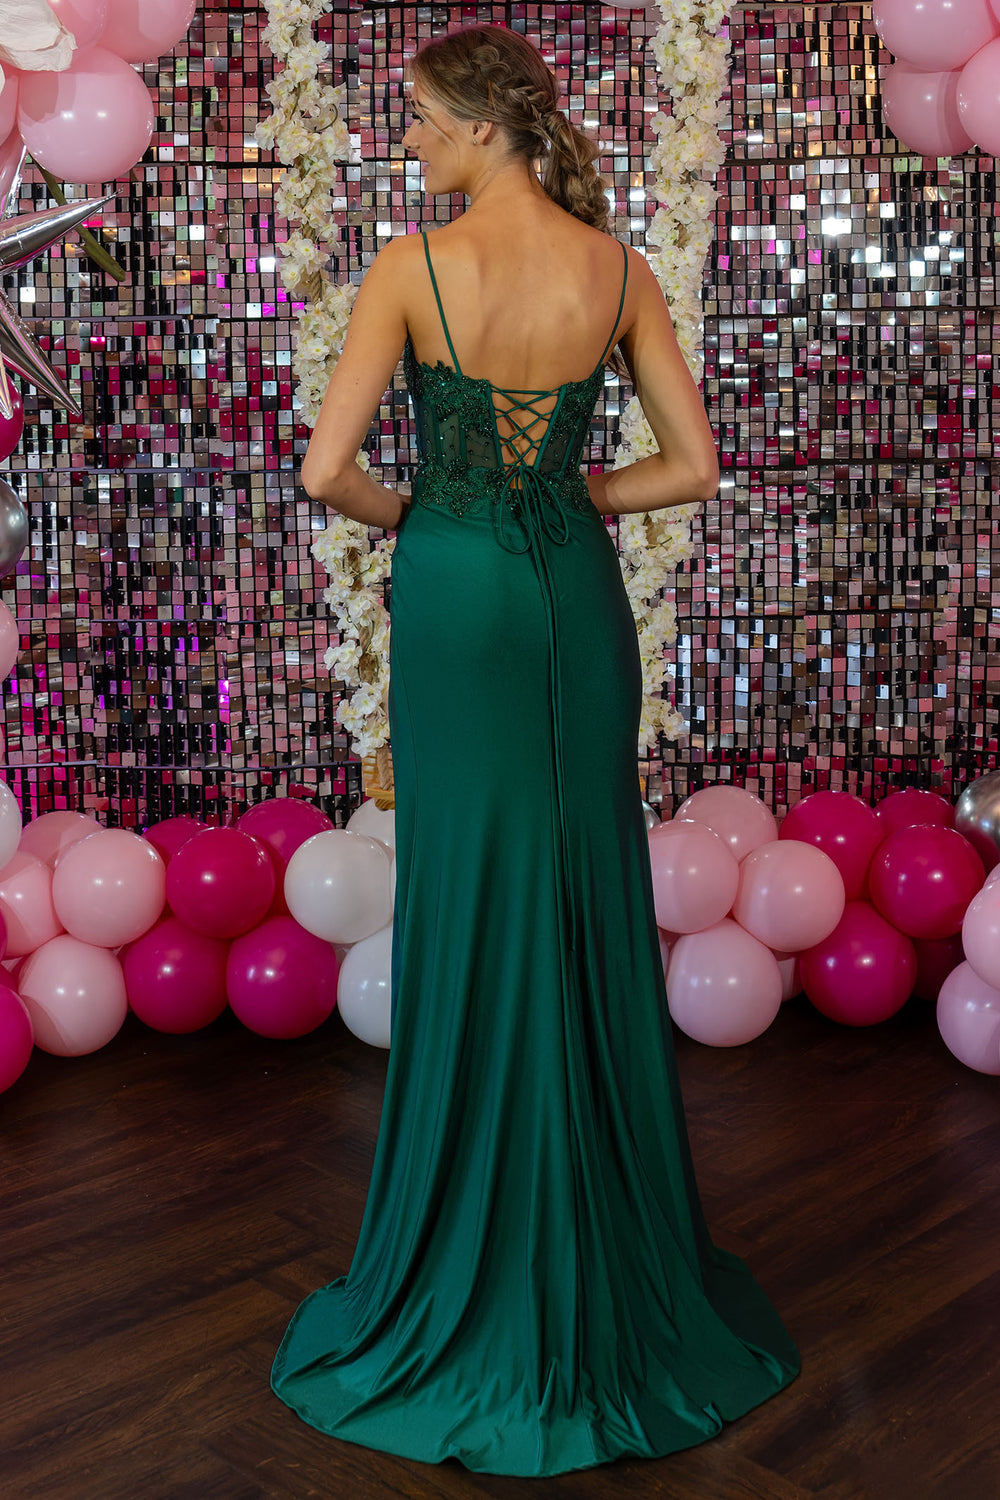 Prom Frocks PF1019 Green Lace Back Corset Prom Dress - Dotique Chesterfield